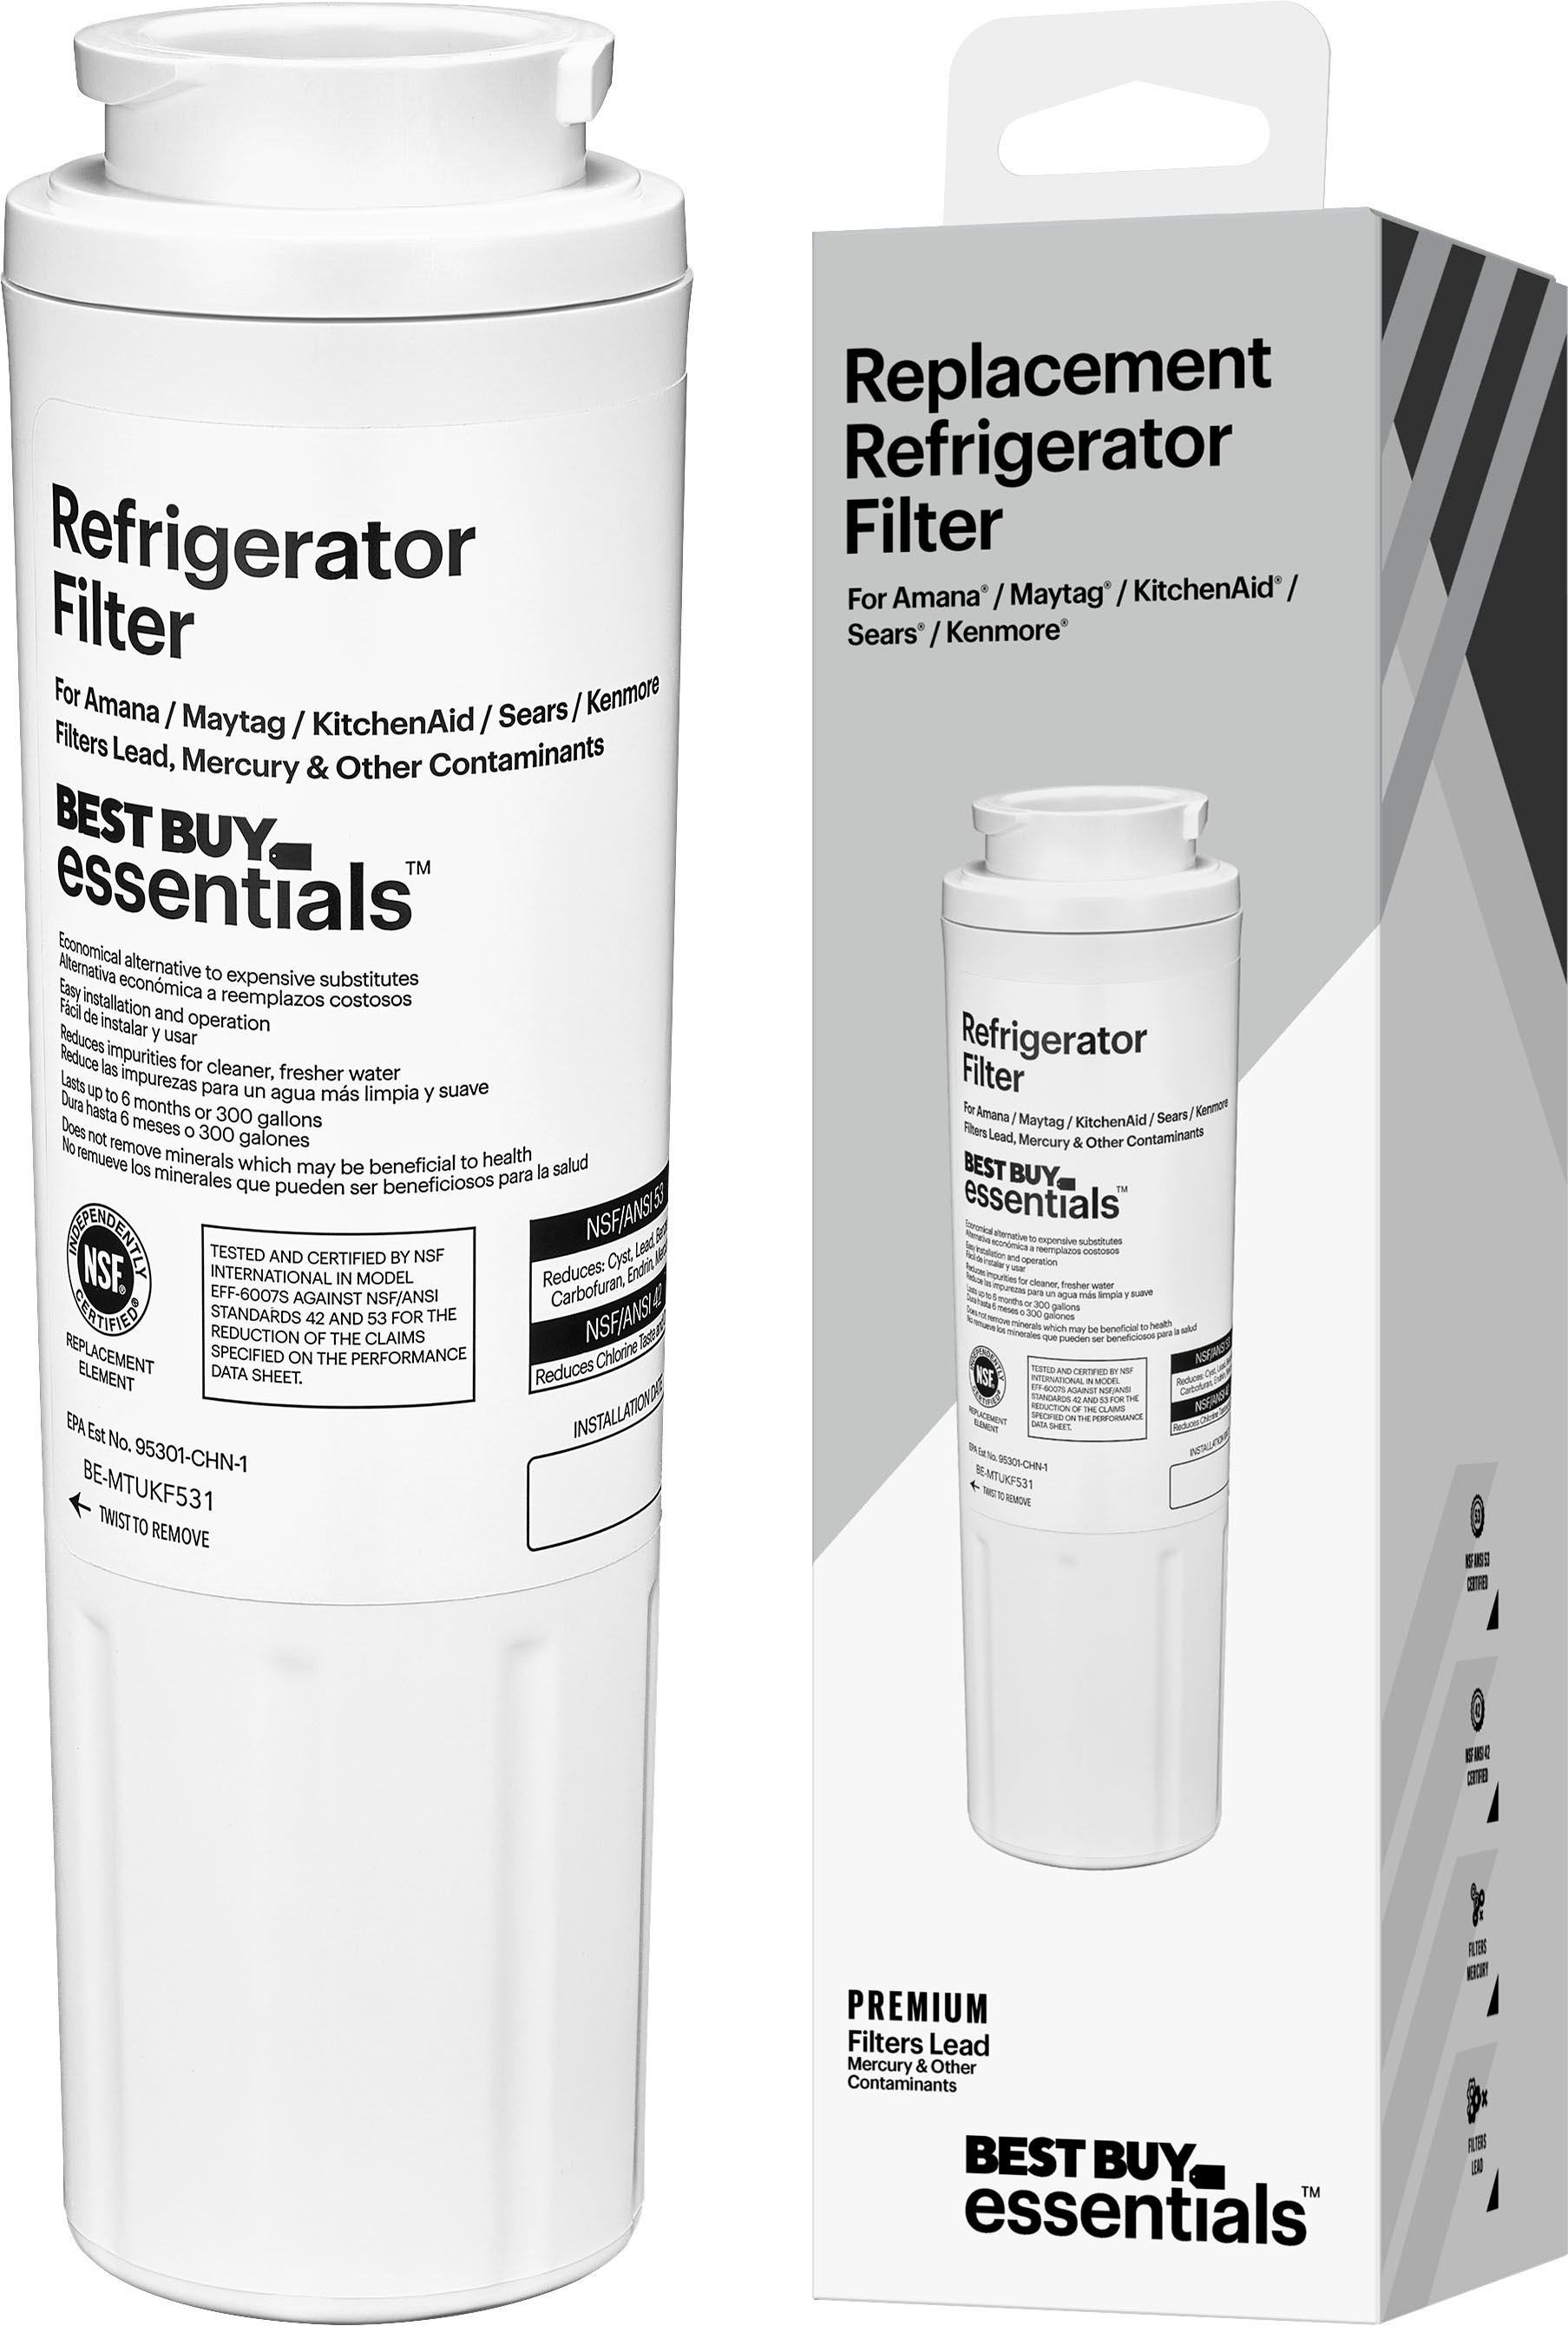 How to Change Water Filter in Kenmore French Door Refrigerator: Quick Guide